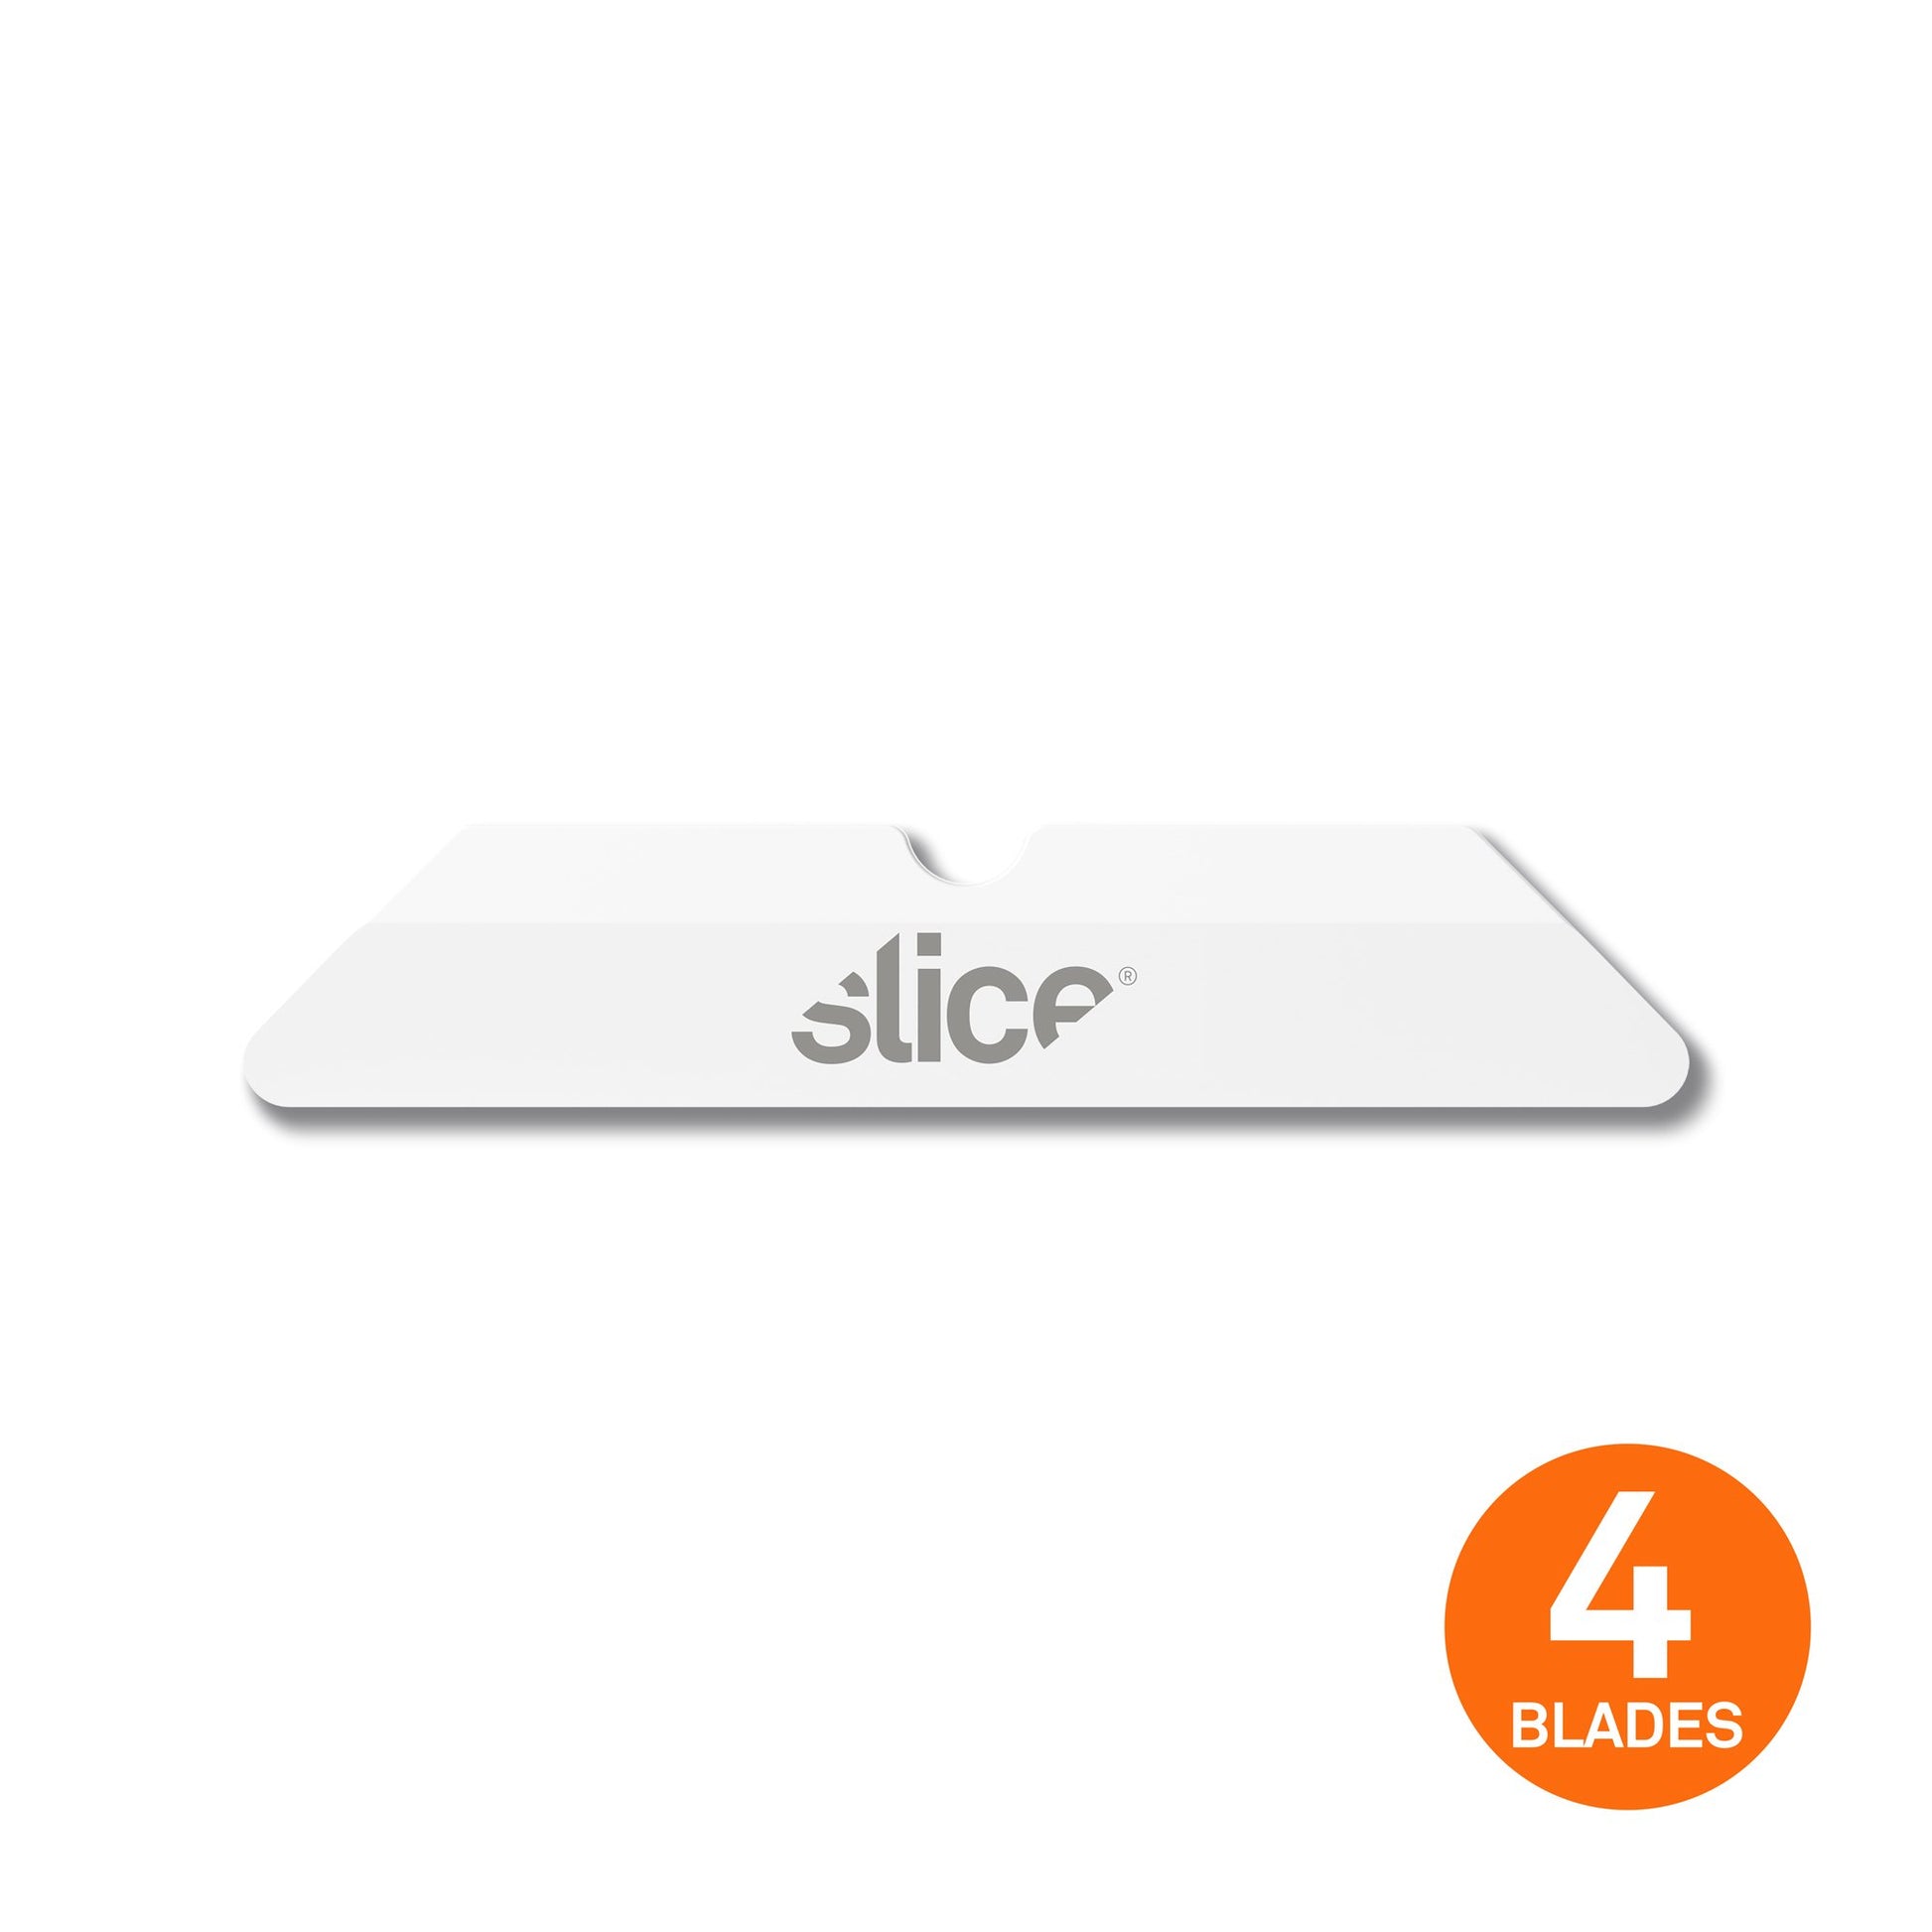 The Slice® 10404 Box Cutter Blade with rounded tips